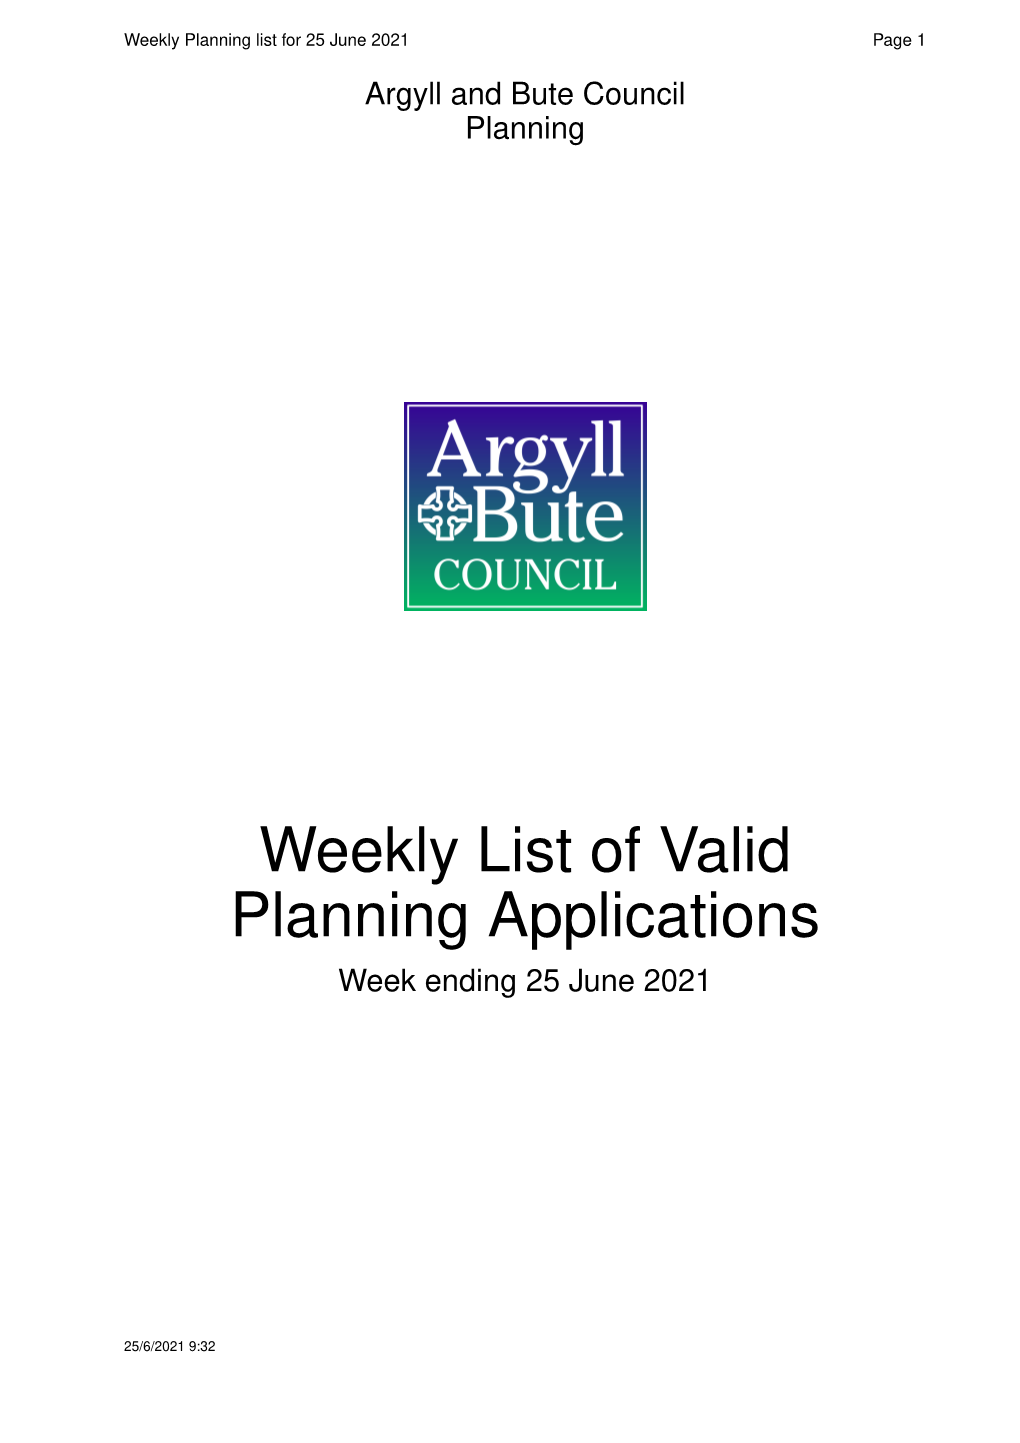 Weekly List of Valid Planning Applications 25Th June 2021.Pdf